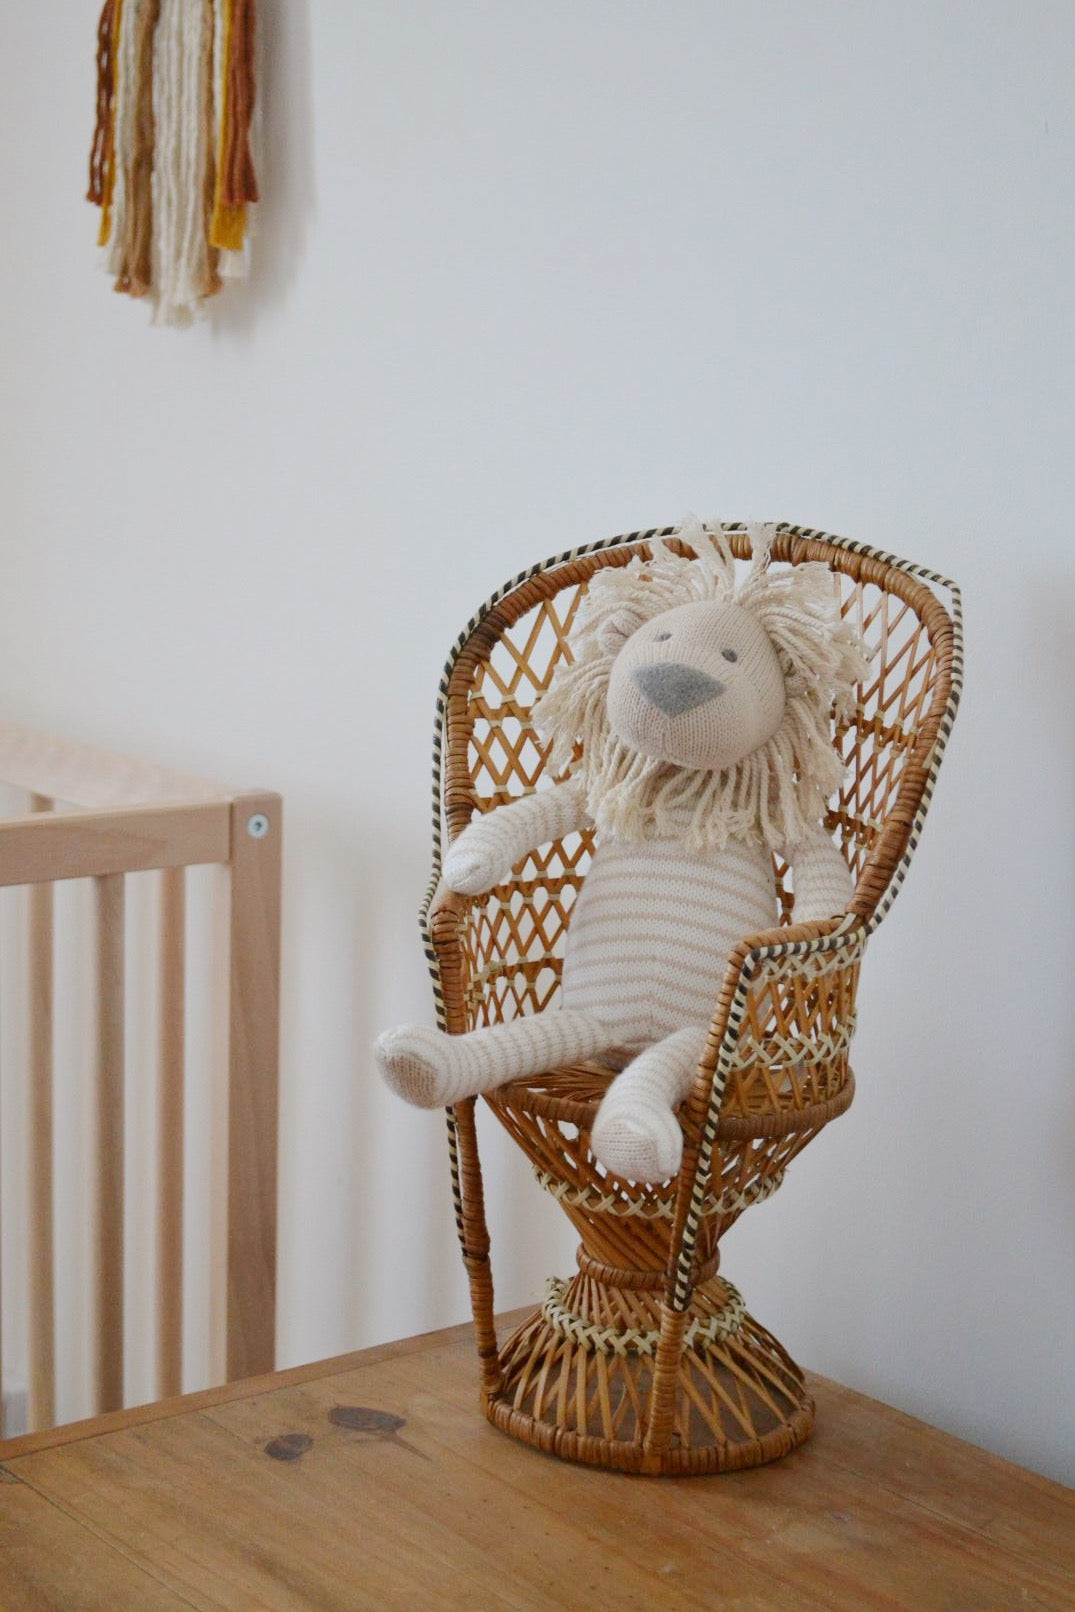 Mini rattan peacock chair with toy lion